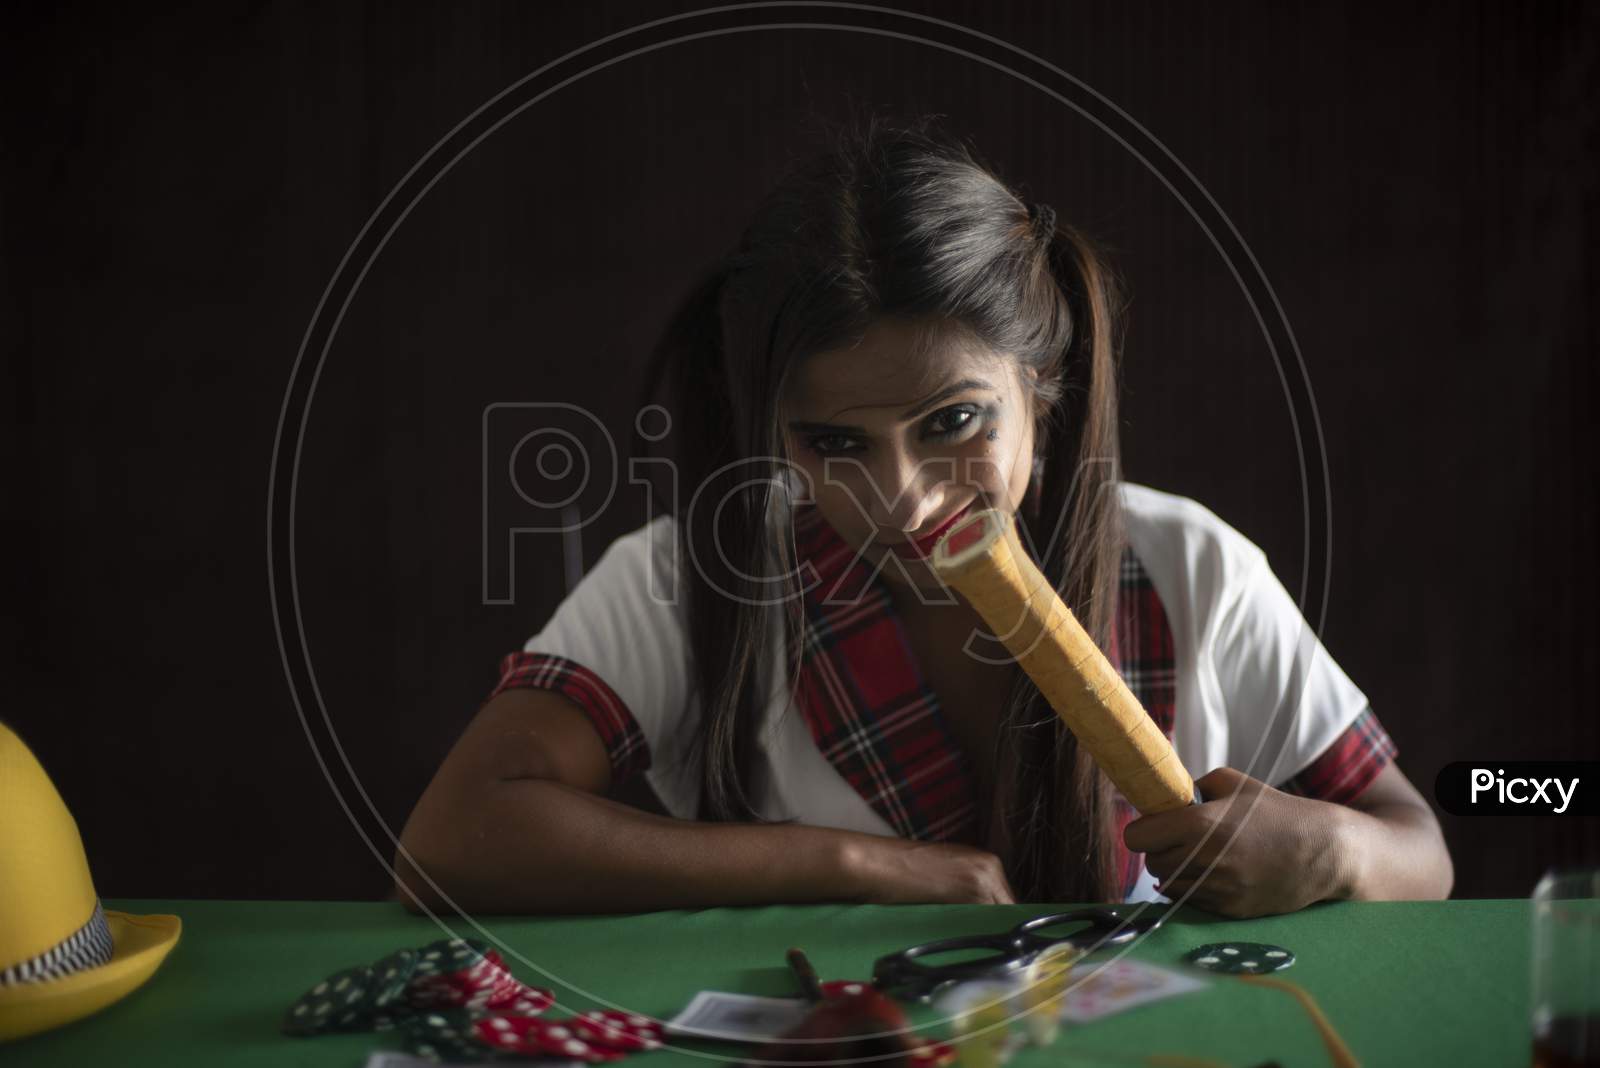 Young Indian Bengali brunette woman in school uniform with a tennis racket sitting on a casino poker table in brown textured copy space studio background. Indian lifestyle and fashion.